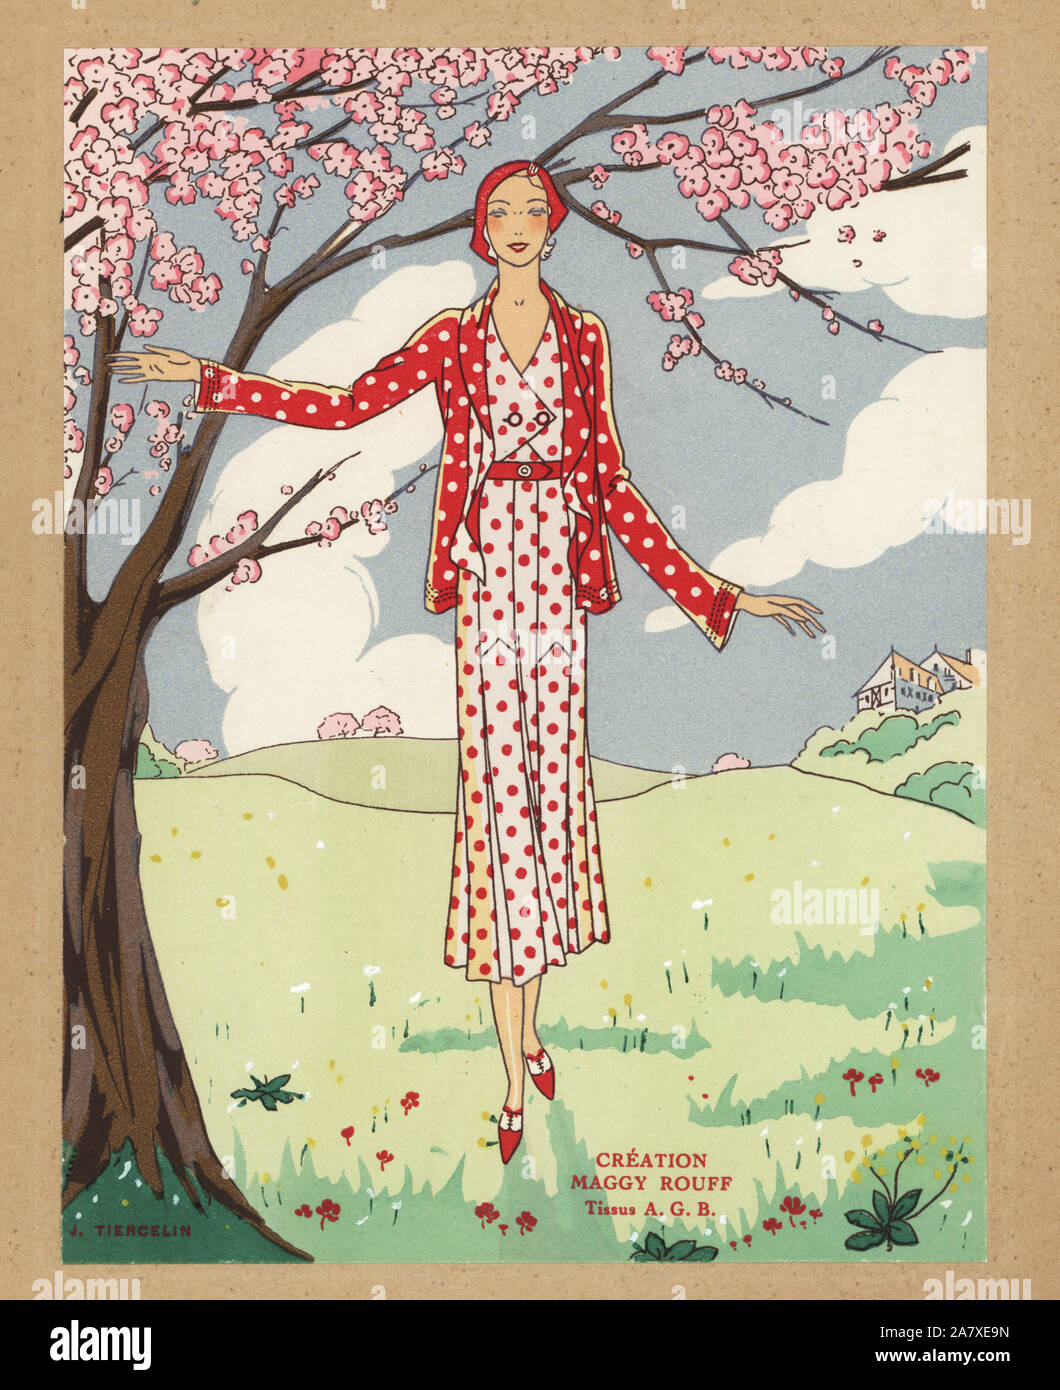 Woman in ensemble of jacket and dress in reverse pink and red polka dots standing in a field under a tree in blossom. Illustration by J. Tiercelin. Handcolored pochoir (stencil) lithograph from the French luxury fashion magazine Art, Gout, Beaute, 1931. Stock Photo